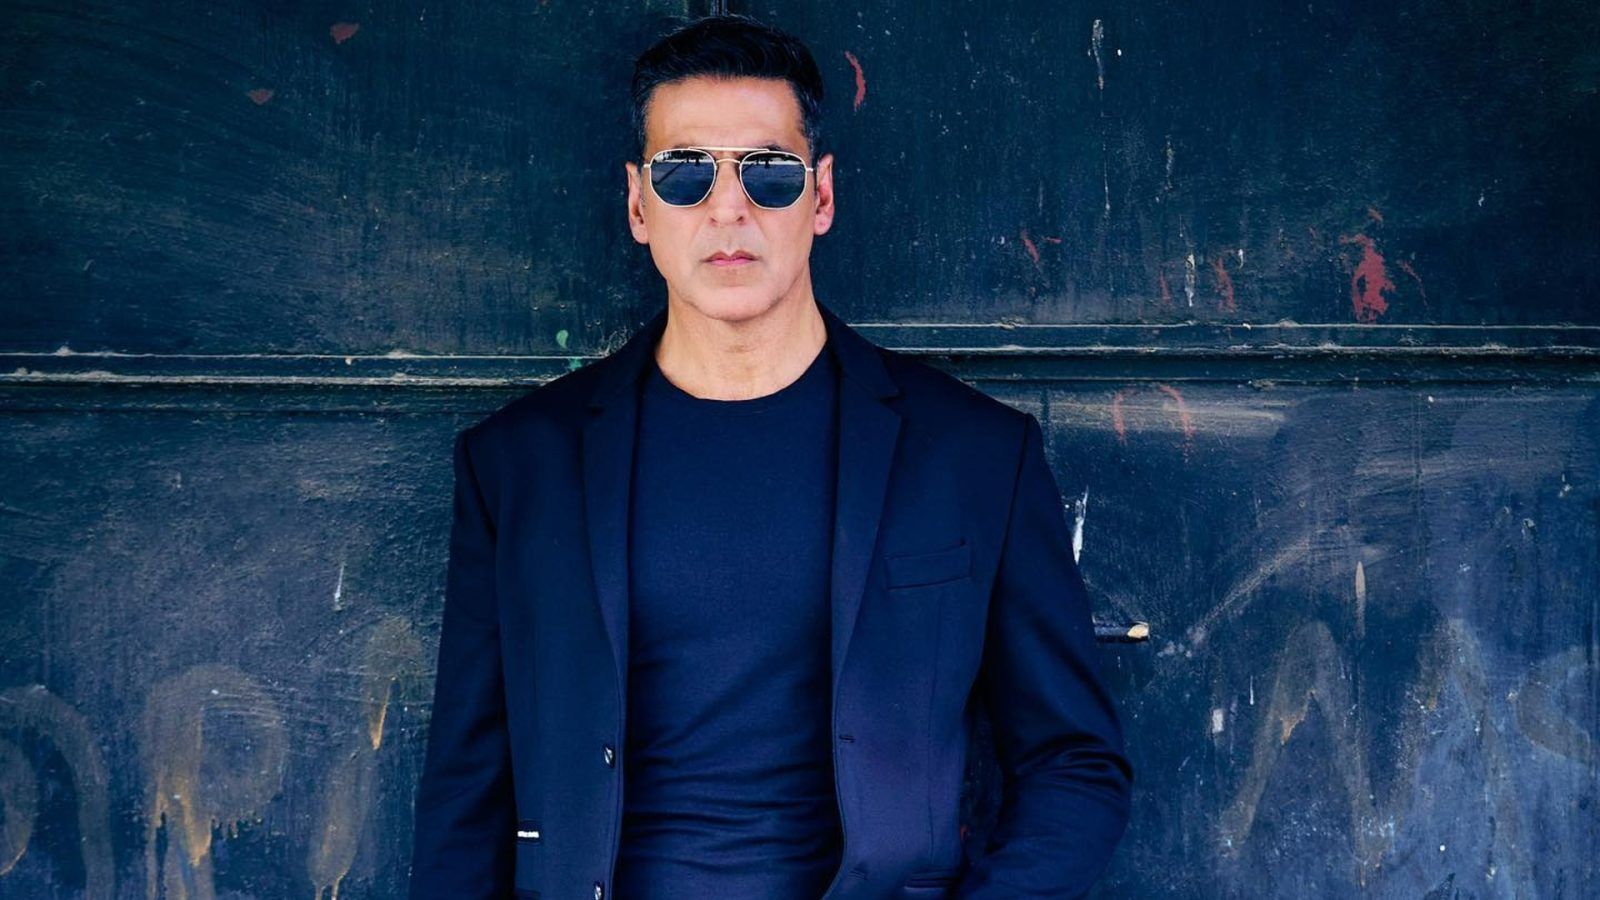 Akshay Kumar Launches Store In Mumbai For His Clothing Brand 'Force IX':  'What A Milestone Day